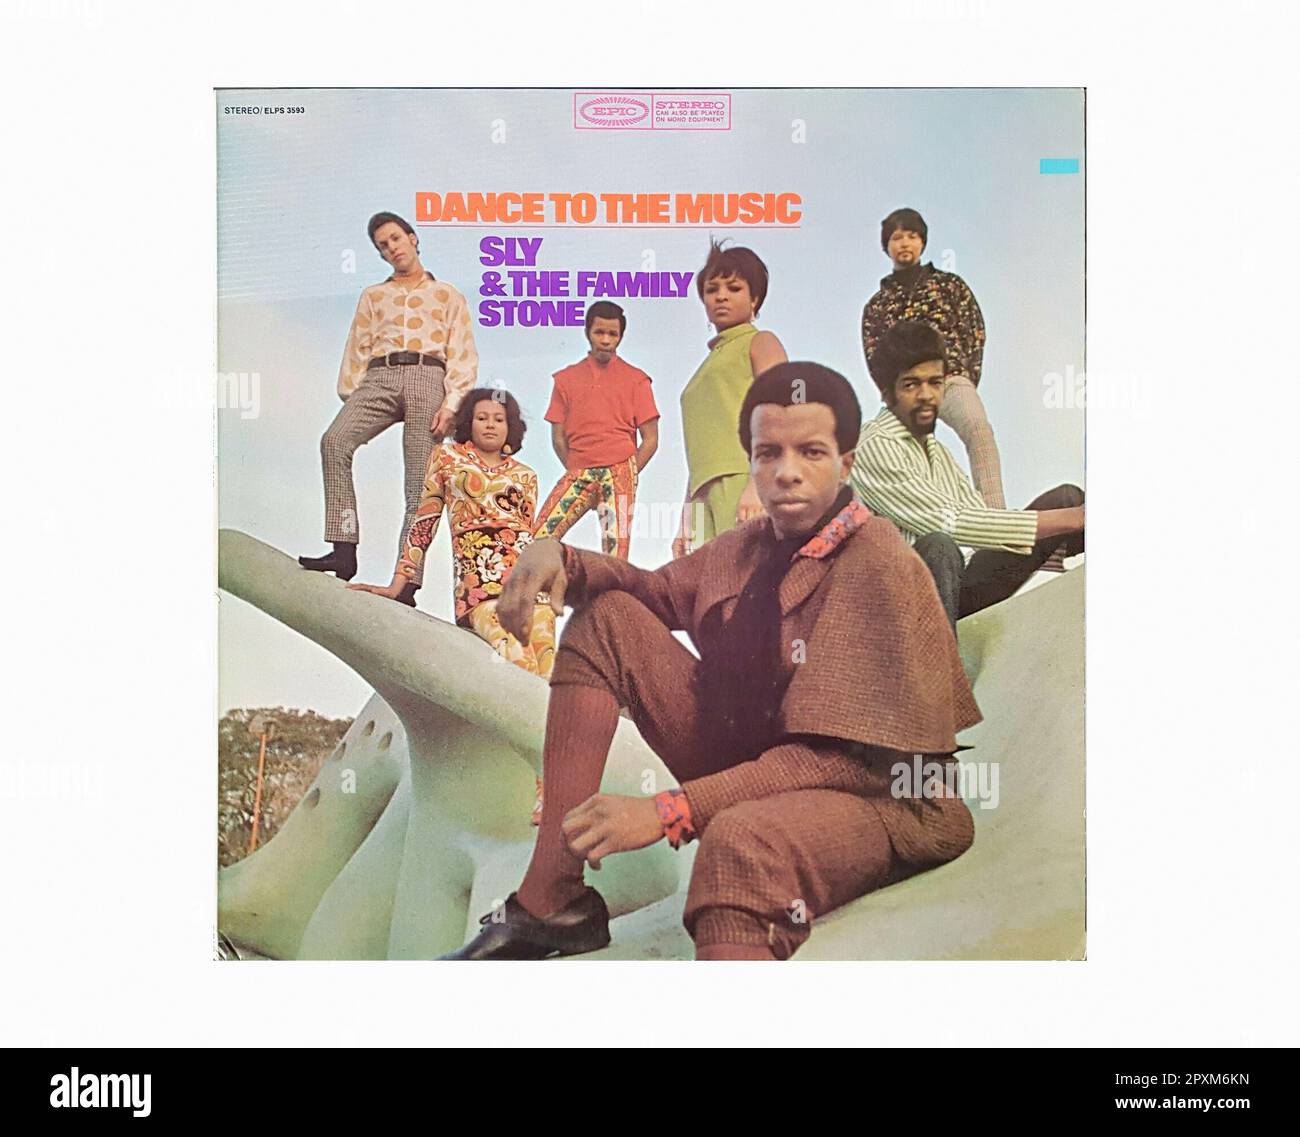 Sly & The Family Stone - Dance To The Music [1968] 00001 - Vintage Vinyl Record Sleeve Stock Photo